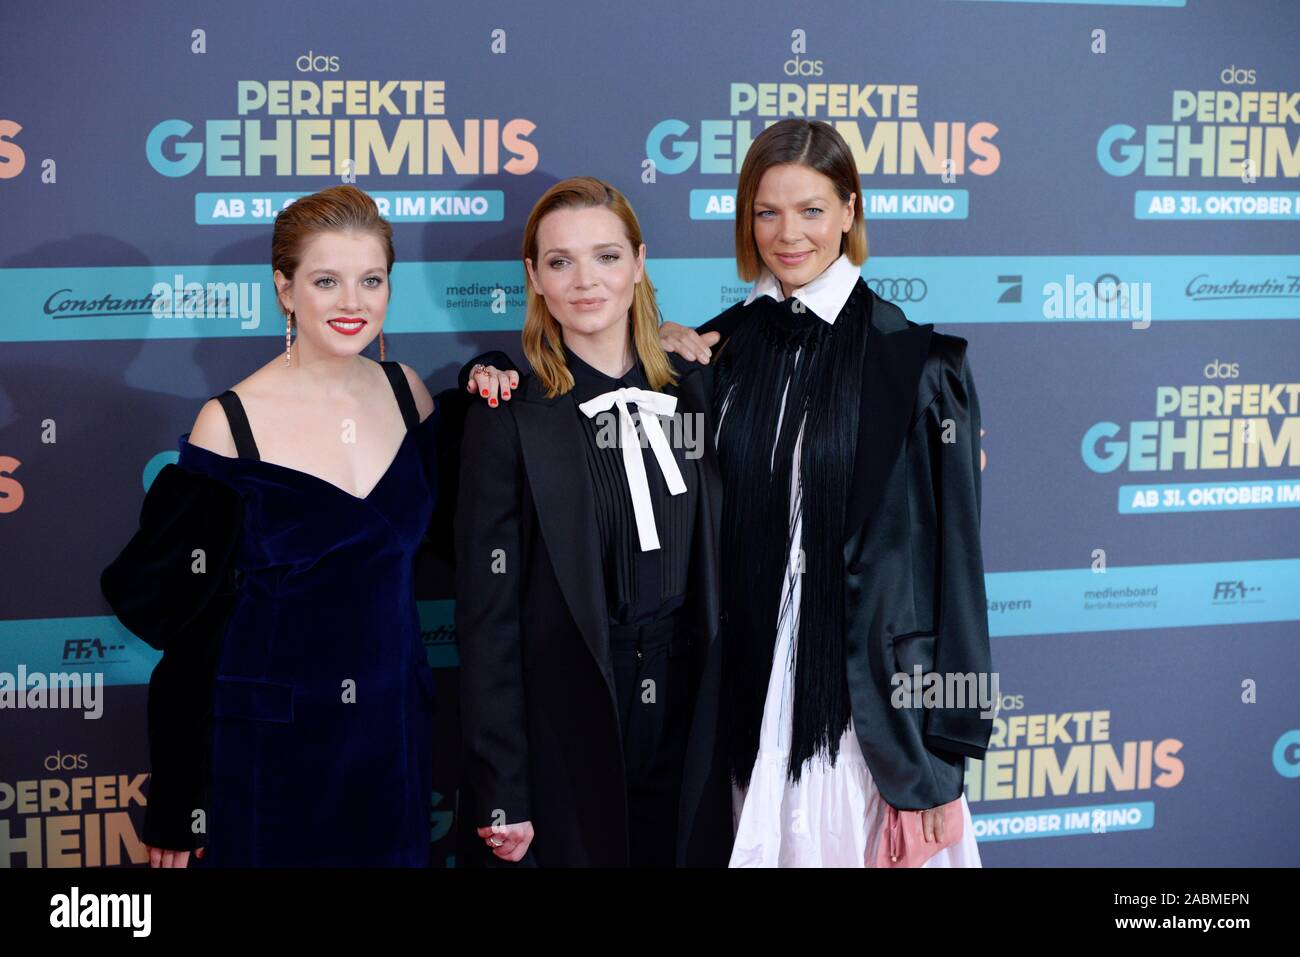 From left to right: The actresses Jella Haase, Karoline Herfurth and Jessica Schwarz at the premiere of the movie 'Das perfekte Geheimnis' at the Mathäser Kino in Munich. [automated translation] Stock Photo